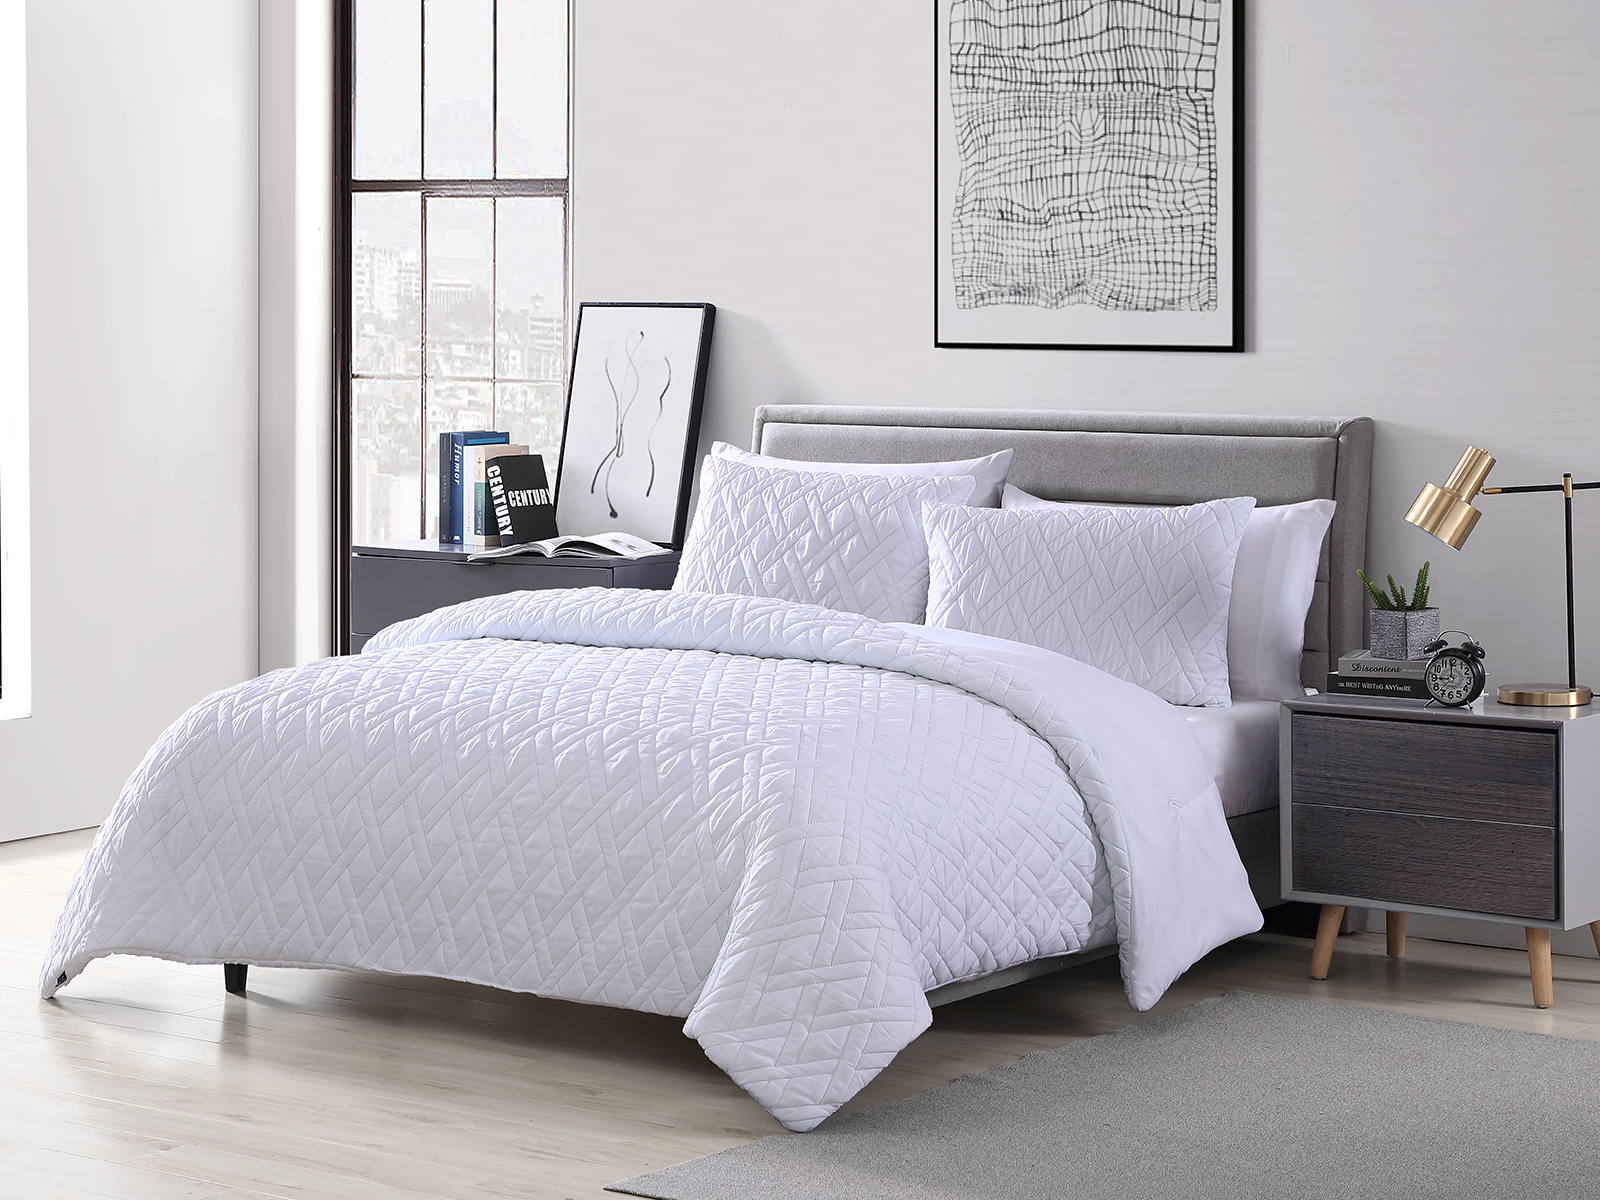 The Nesting Company Queen Larch Comforter Set | White